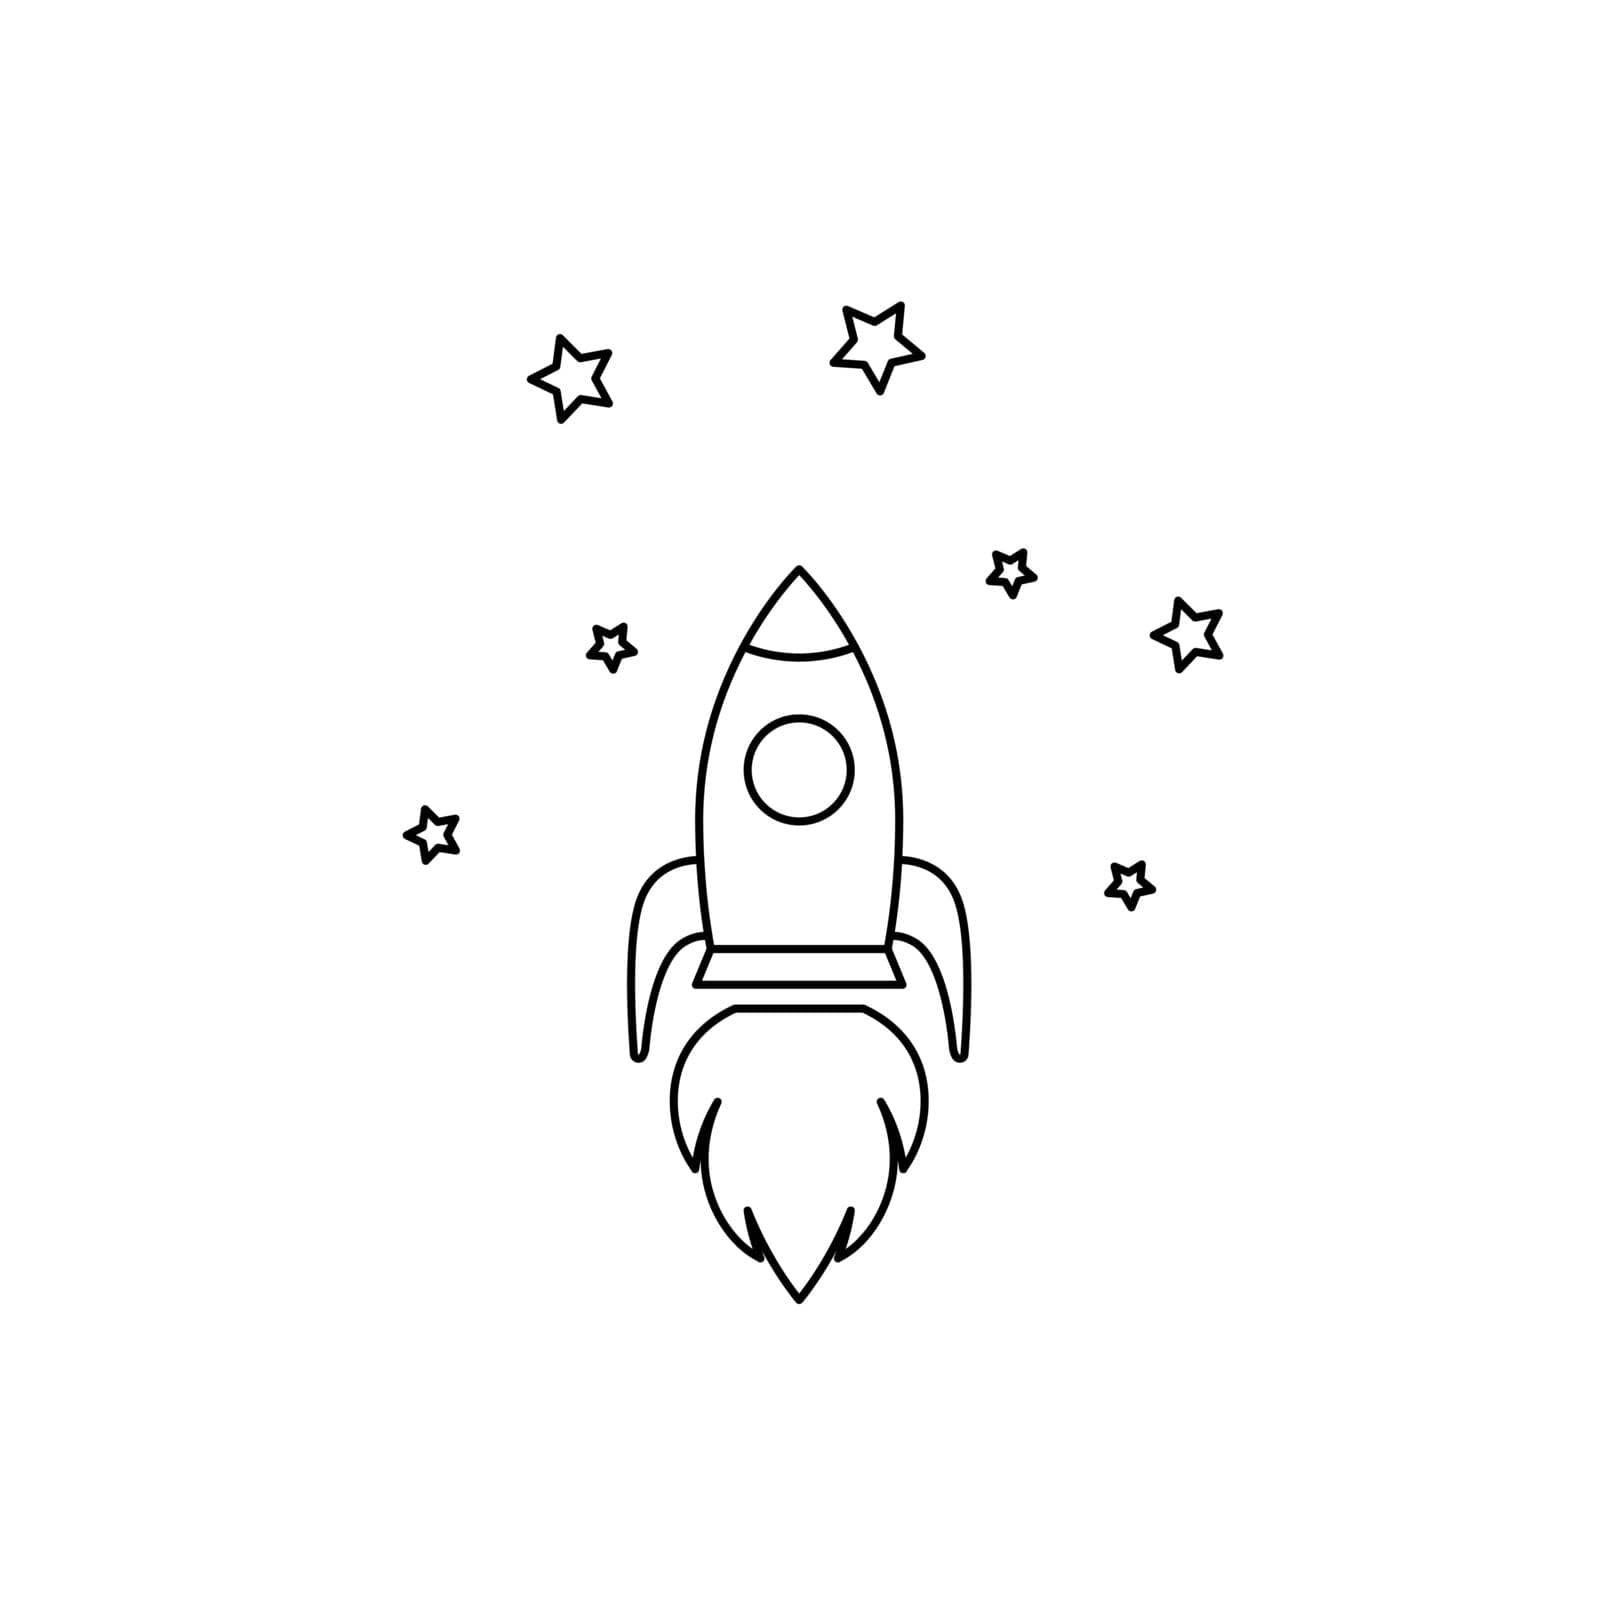 Rocket icon. Rocket ship in linear style. Startup concept black icon by Chekman